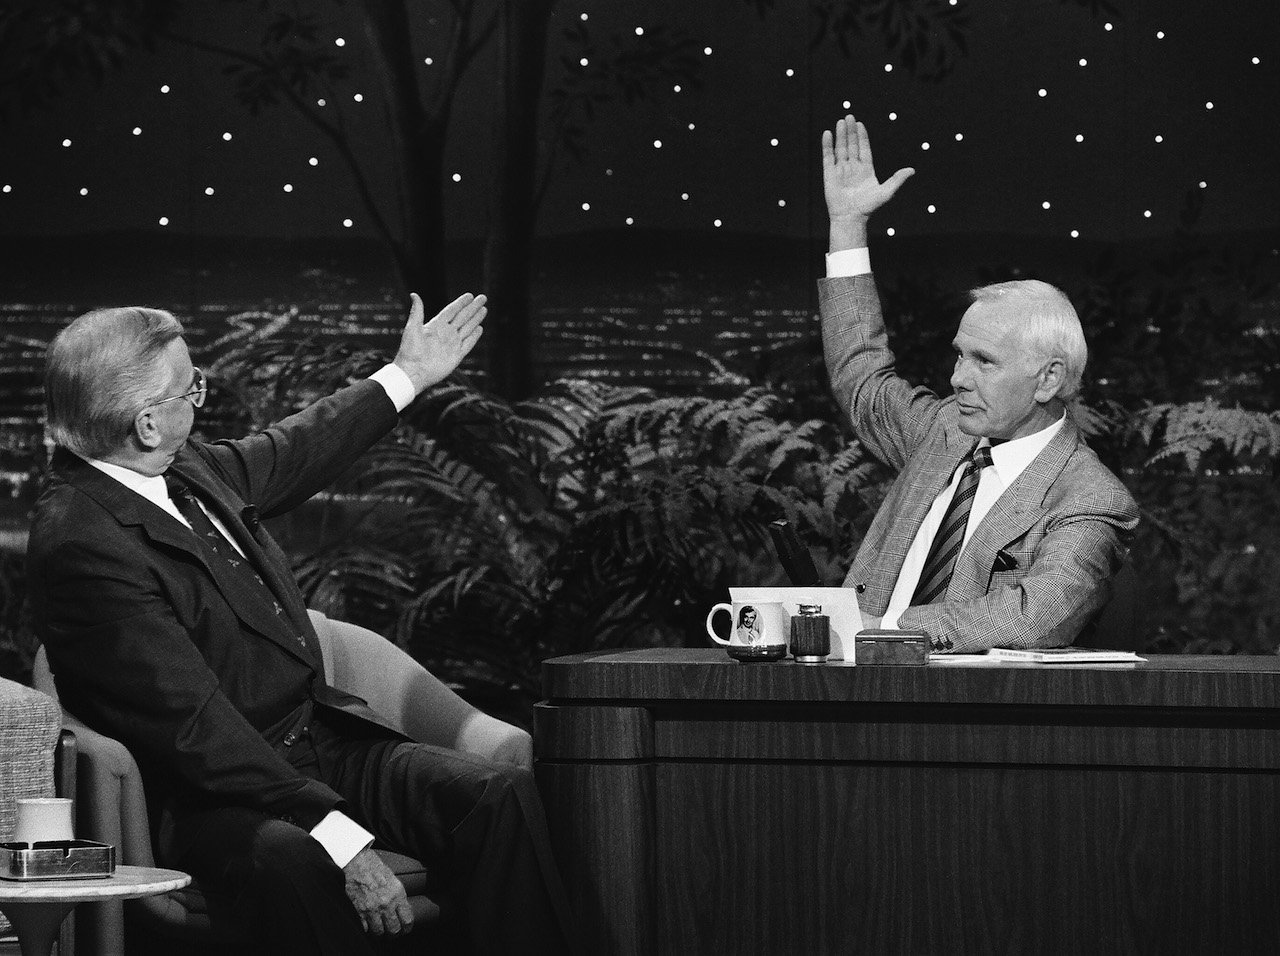 (L-R) Ed McMahon raising a hand toward Johnny Carson, also raising his hand, on 'The Tonight Show' in 1990